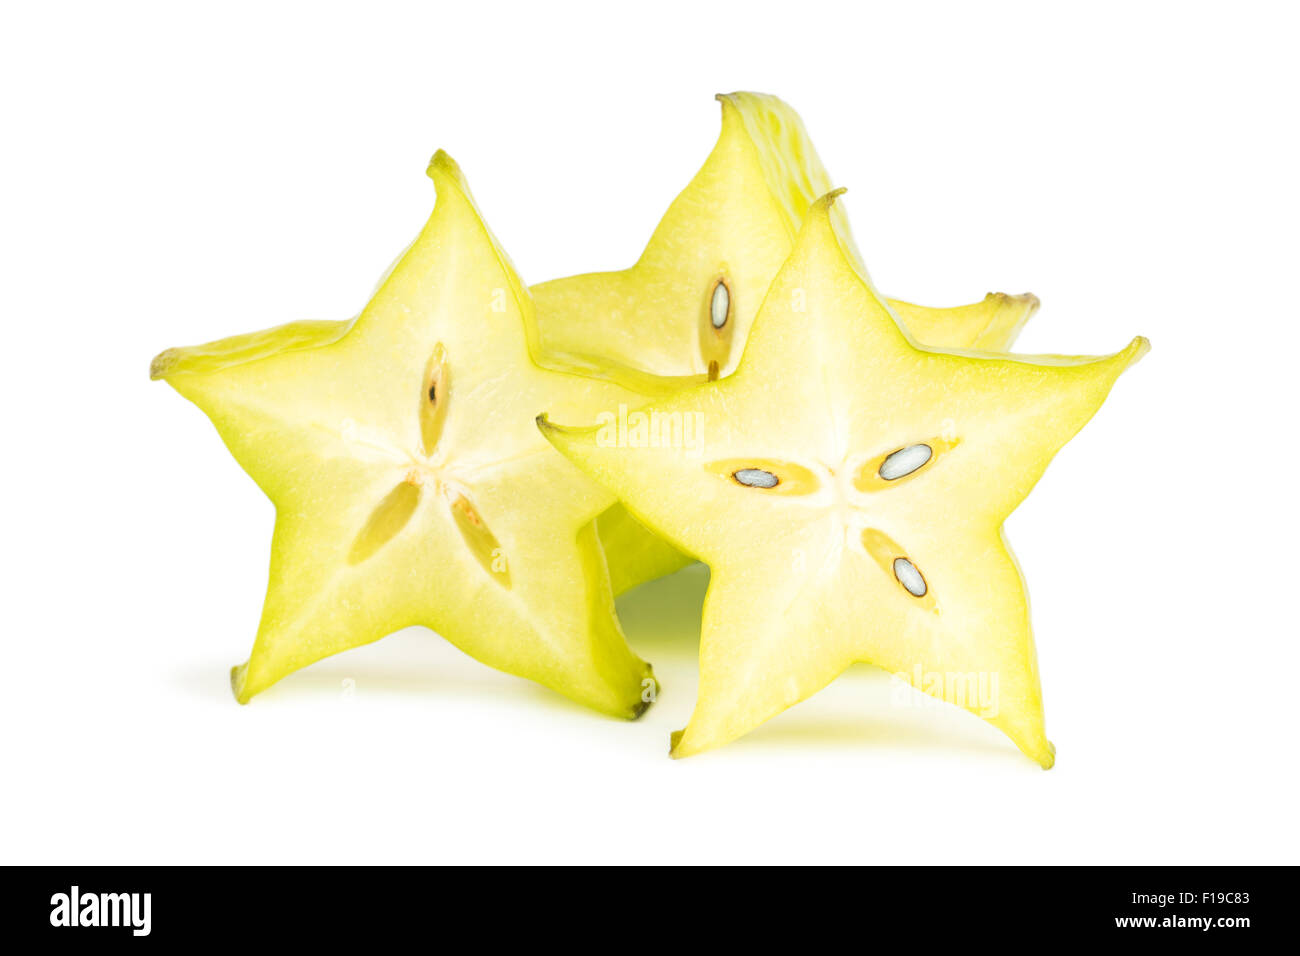 Close-up of three carambola (starfruit) slices, viewed from the front, isolated on white background. Stock Photo